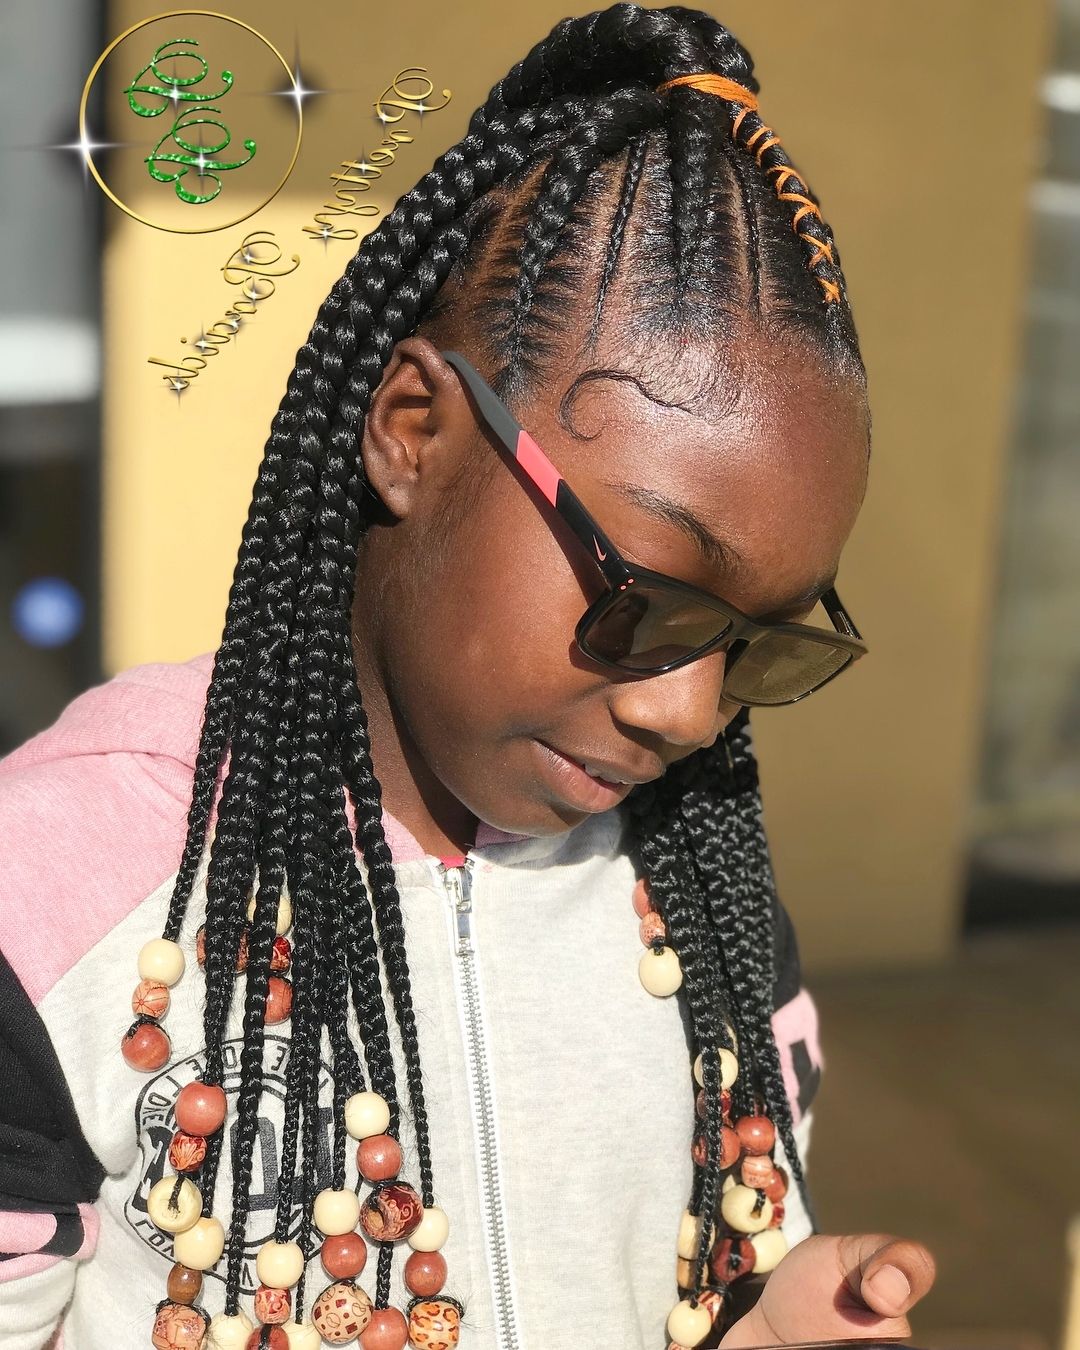 Renobraider Instagram Tag – Instahu With Recent Geometric Tribal Fulani Pattern Braids With Curly Wisps (View 5 of 15)